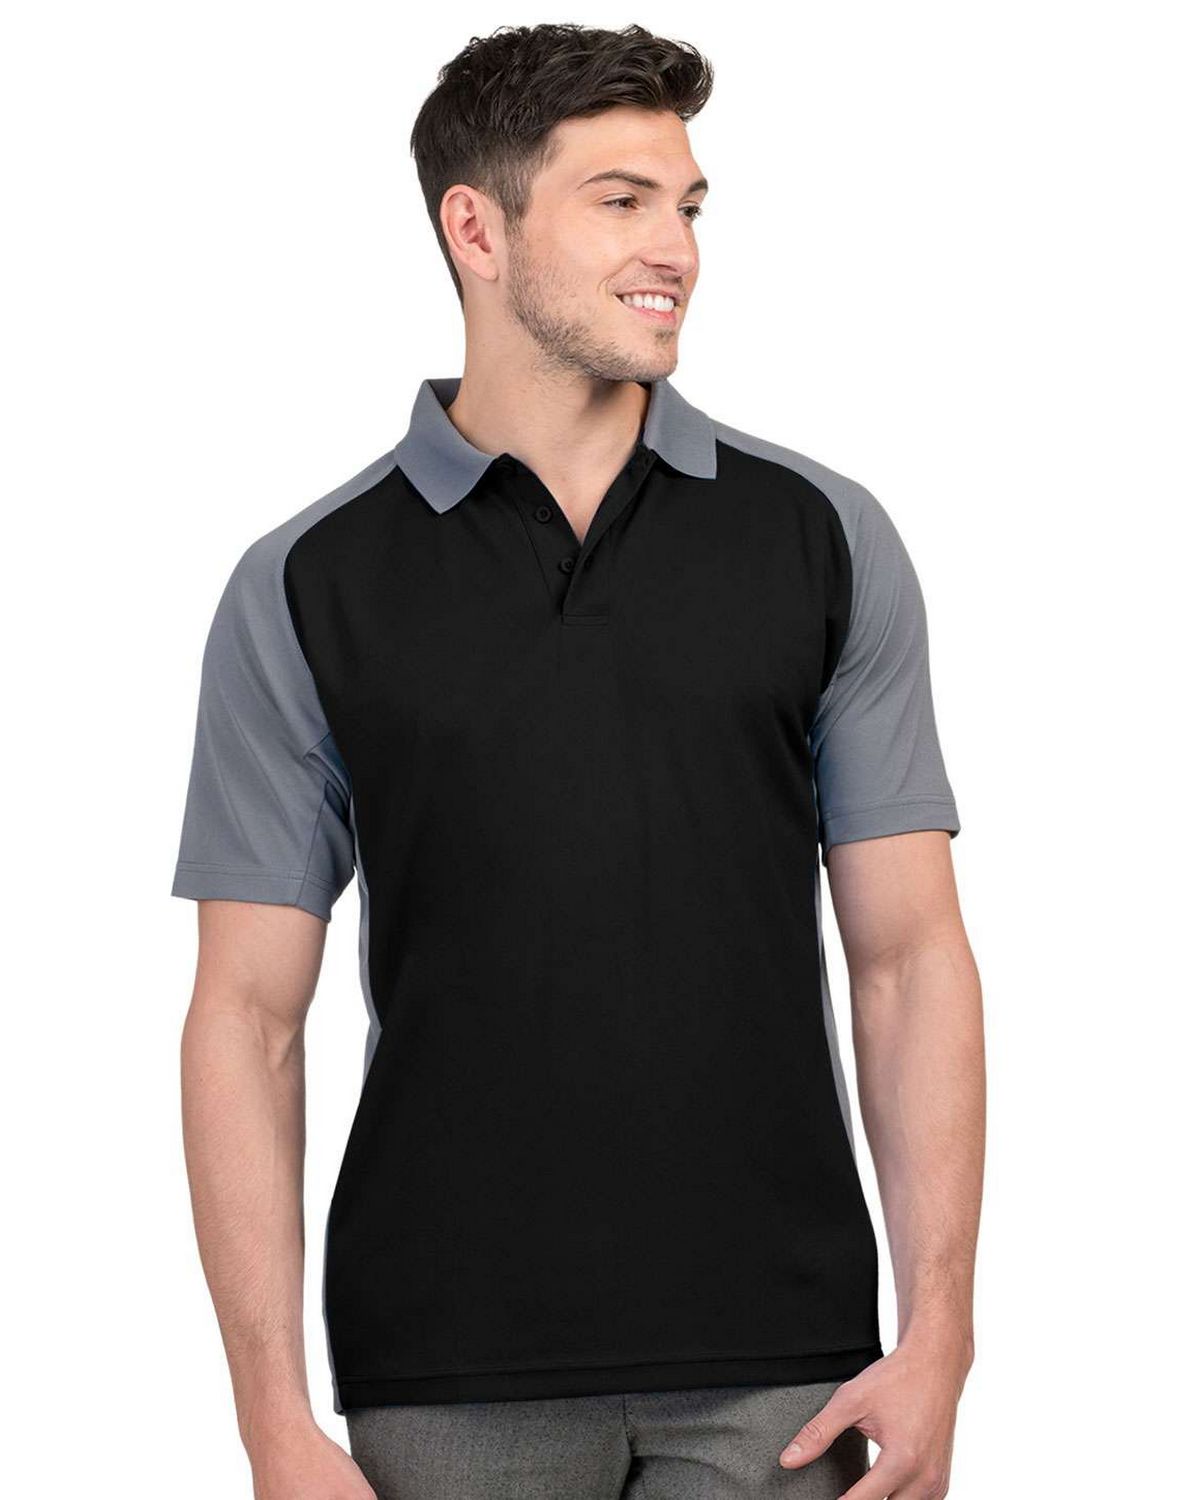 Size Chart for Tri-Mountain Performance K019 Mens Colorblock Polo Shirt